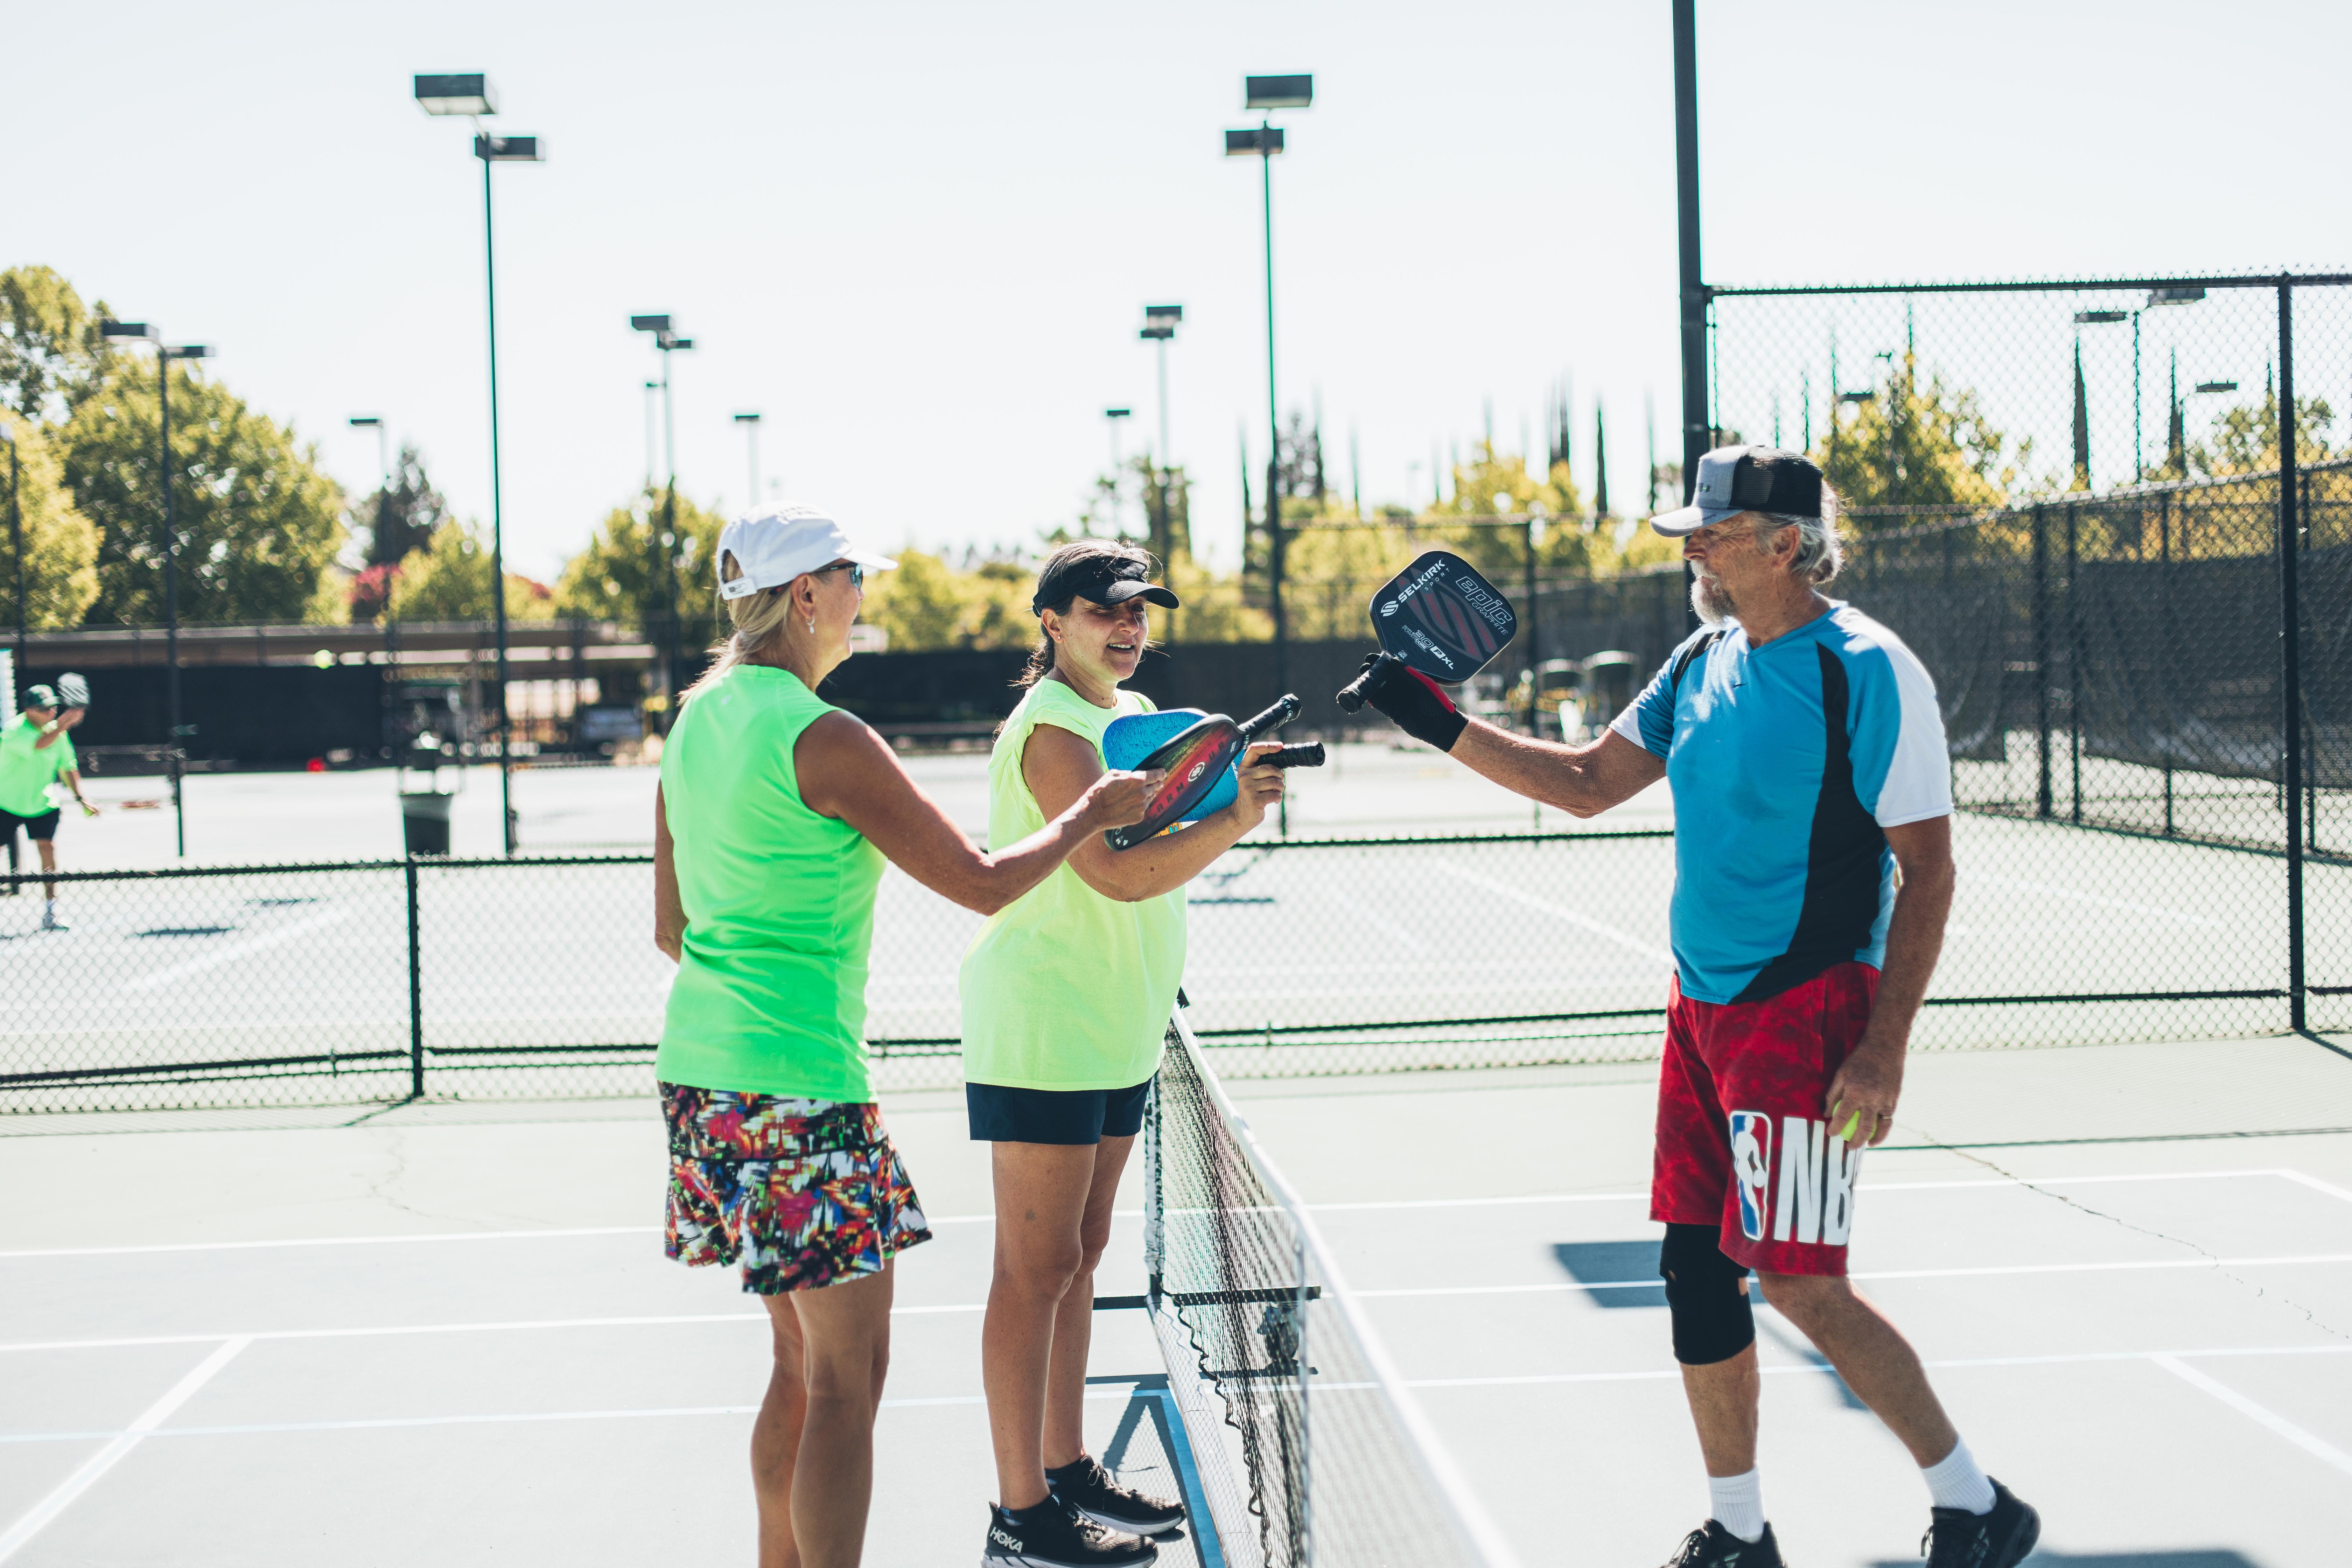 In-Shape Health Clubs has a vibrant community of pickleball enthusiasts. Come join the fun!